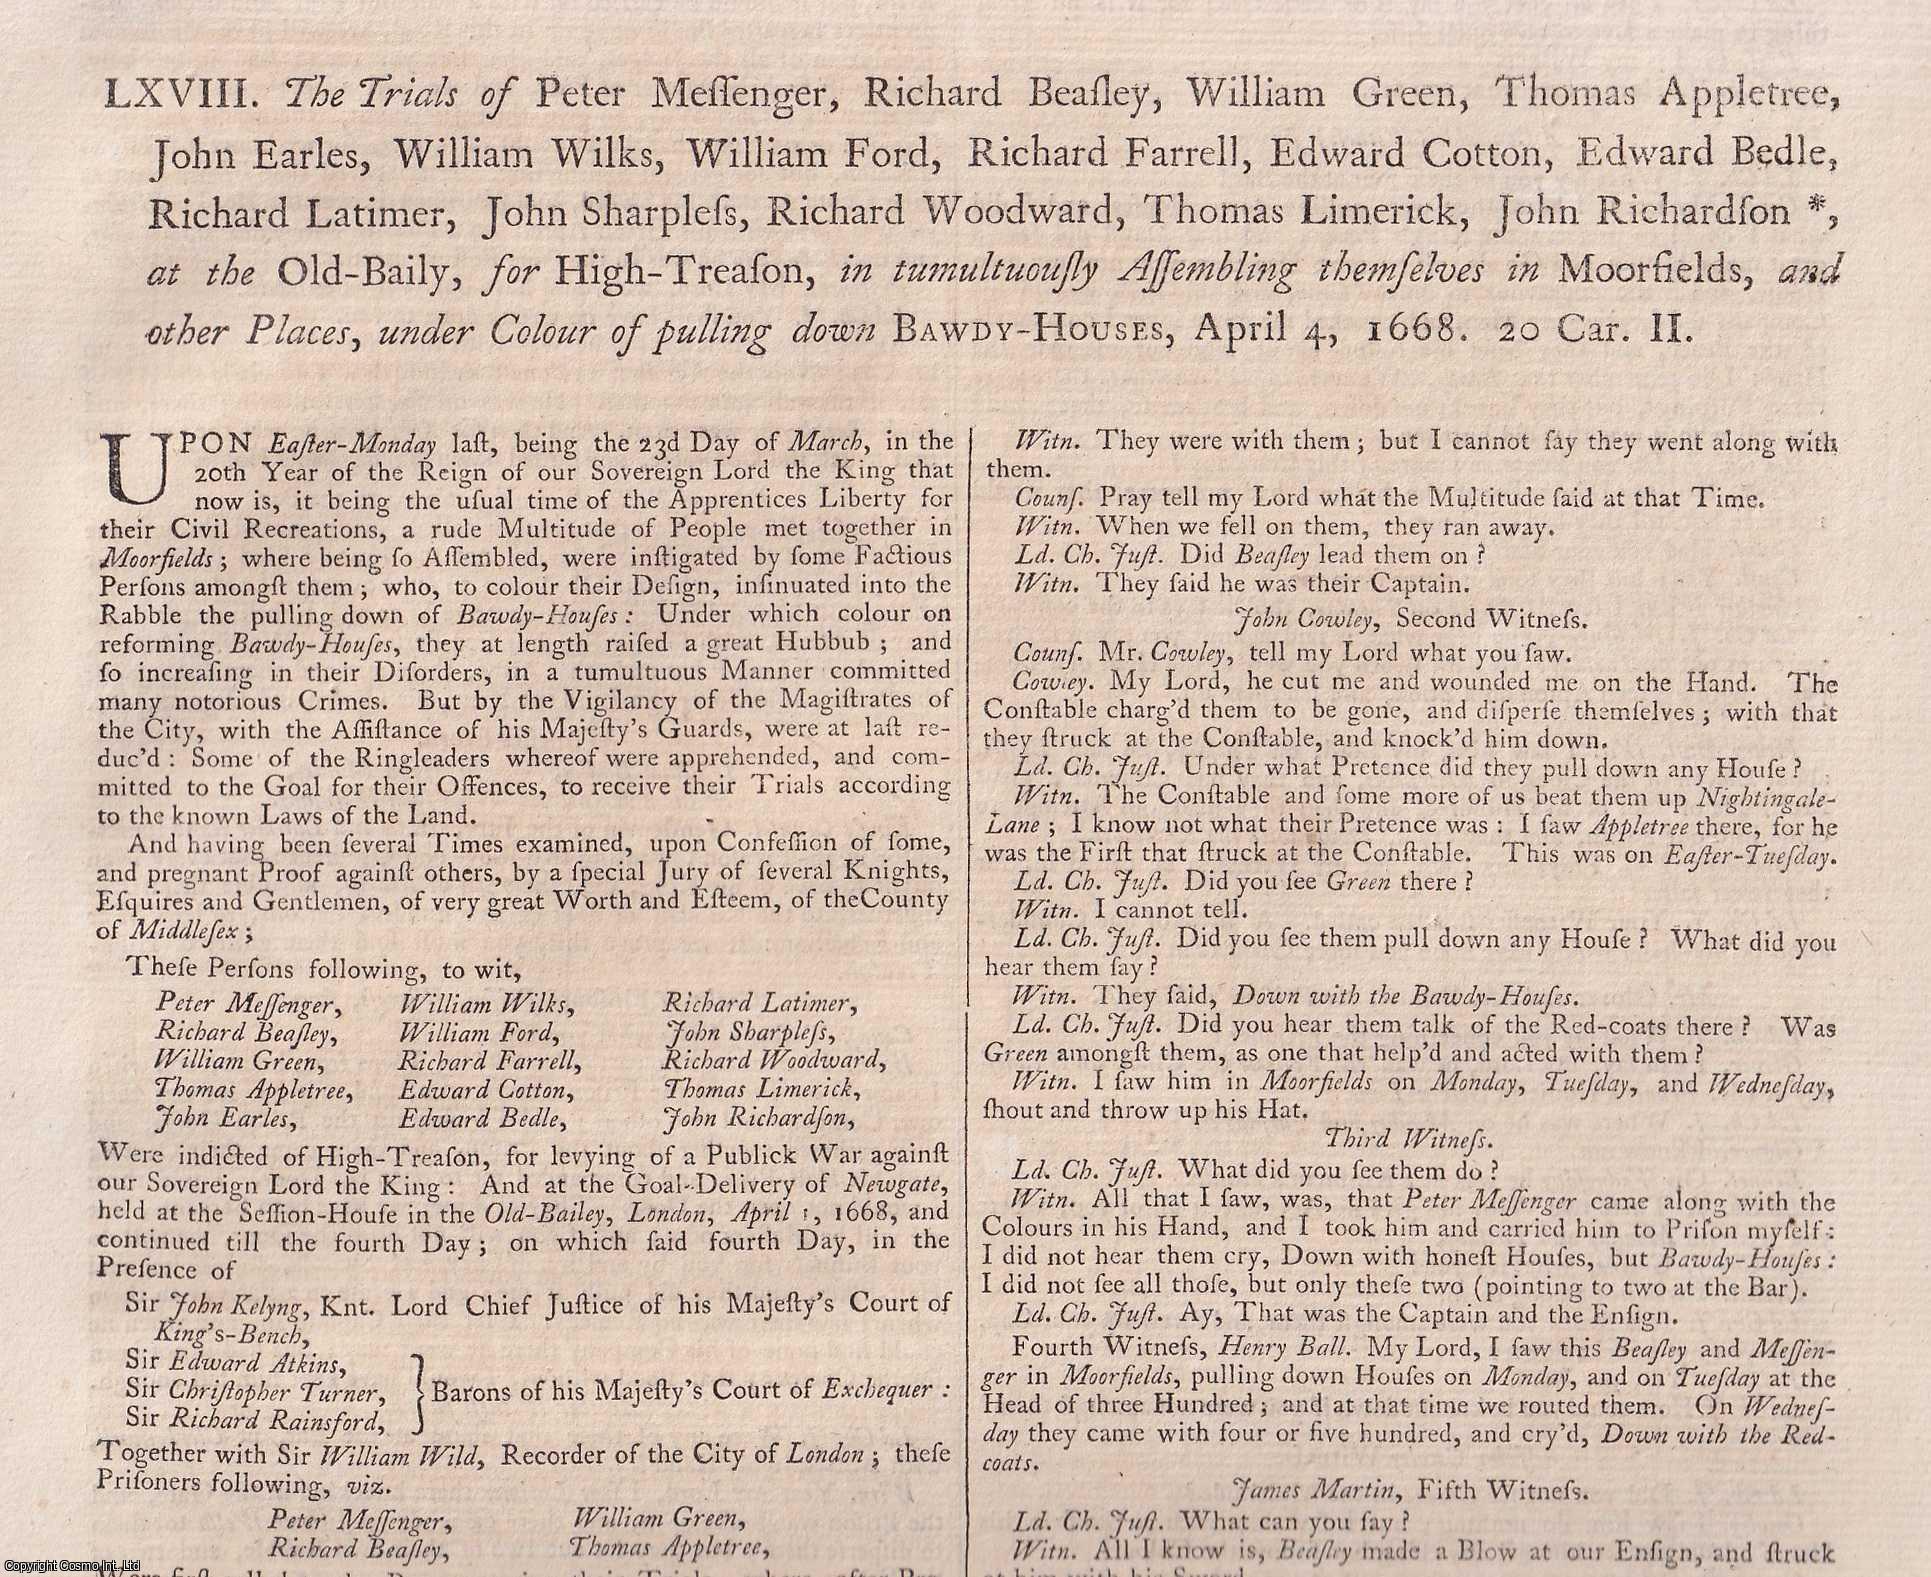 [Trial] - The Trials of Peter Messenger, Richard Beasley, William Green, Thomas Appletree... [et al], for High Treason, in tumultuously Assembling themselves in Moorfields, and other Places, under Colour of pulling down Bawdy Houses, April 4, 1668. An original article from the Collected State Trials.